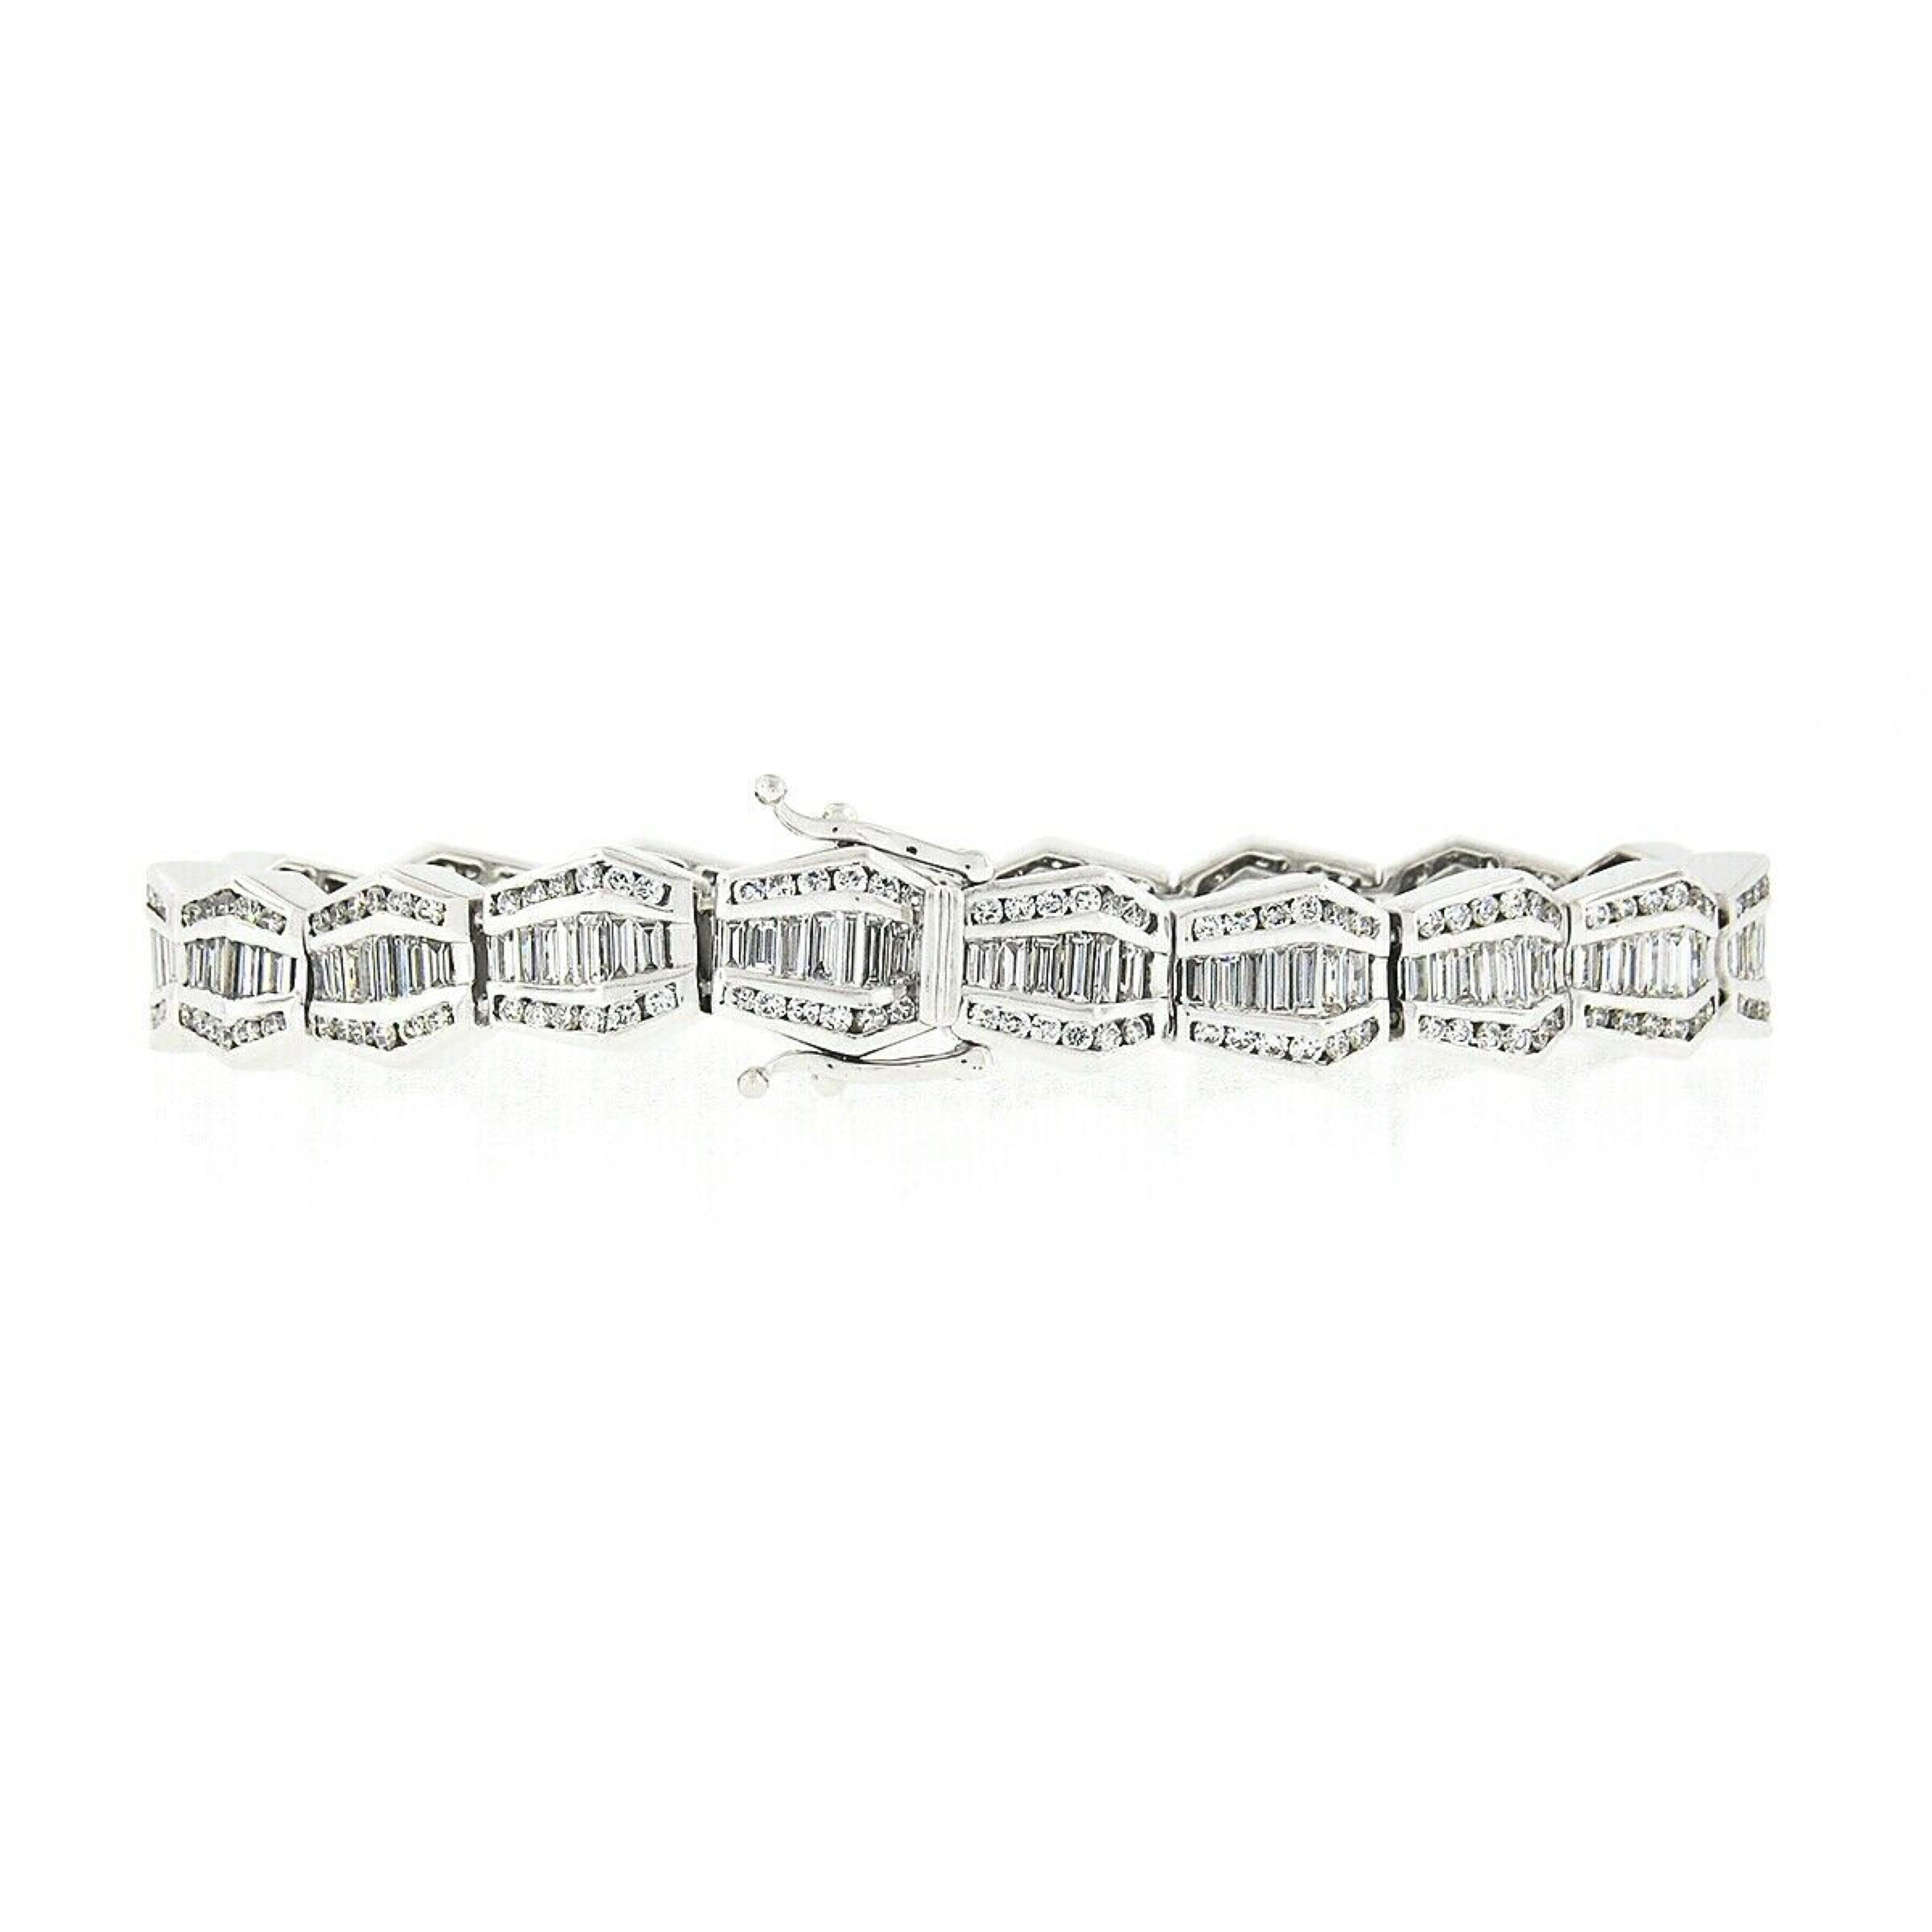 Here we have an absolutely magnificent and very well made statement bracelet that is crafted from solid 18k white gold featuring an elegant design constructed from unique links that are completely drenched with TOP QUALITY diamonds throughout. These